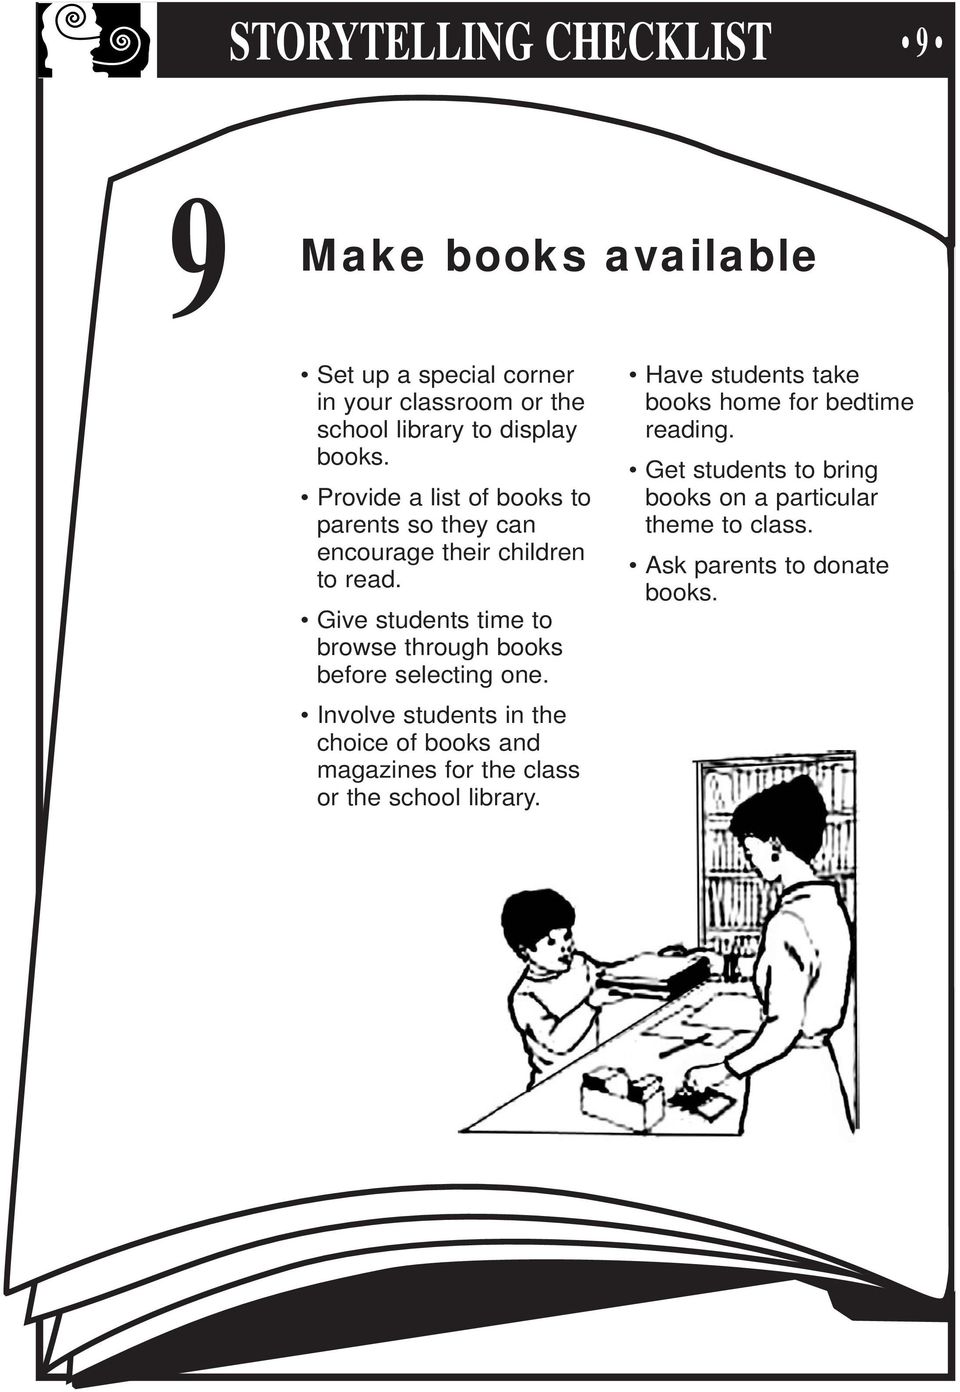 Give students time to browse through books before selecting one.